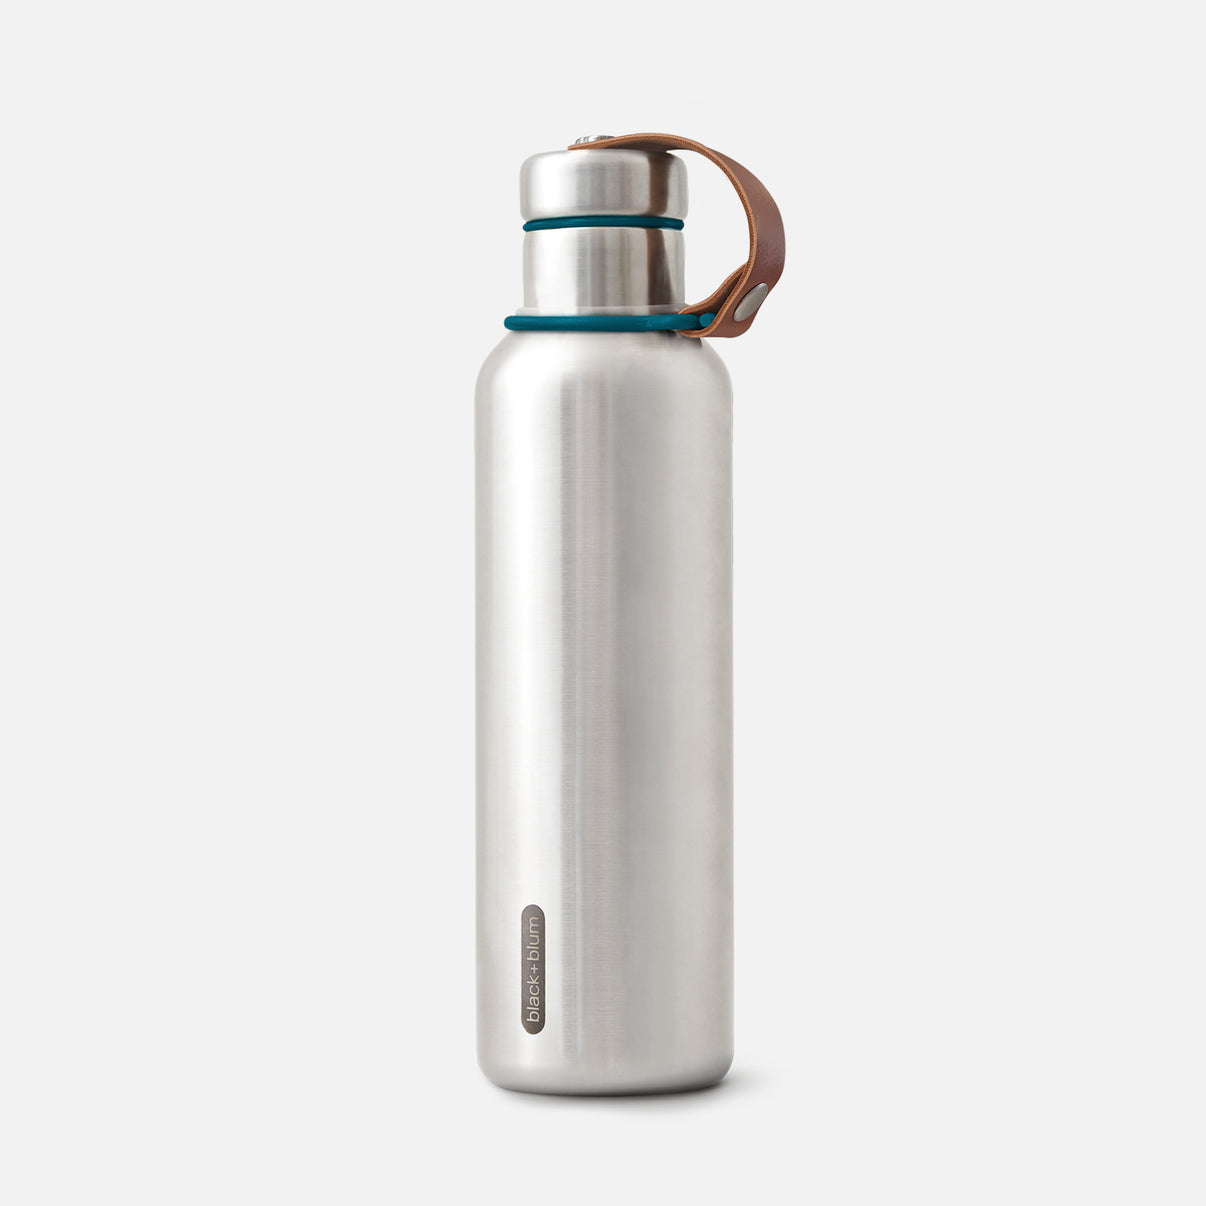 fl oz Light Weight Water Bottle Wide Loop Brushed Stainless